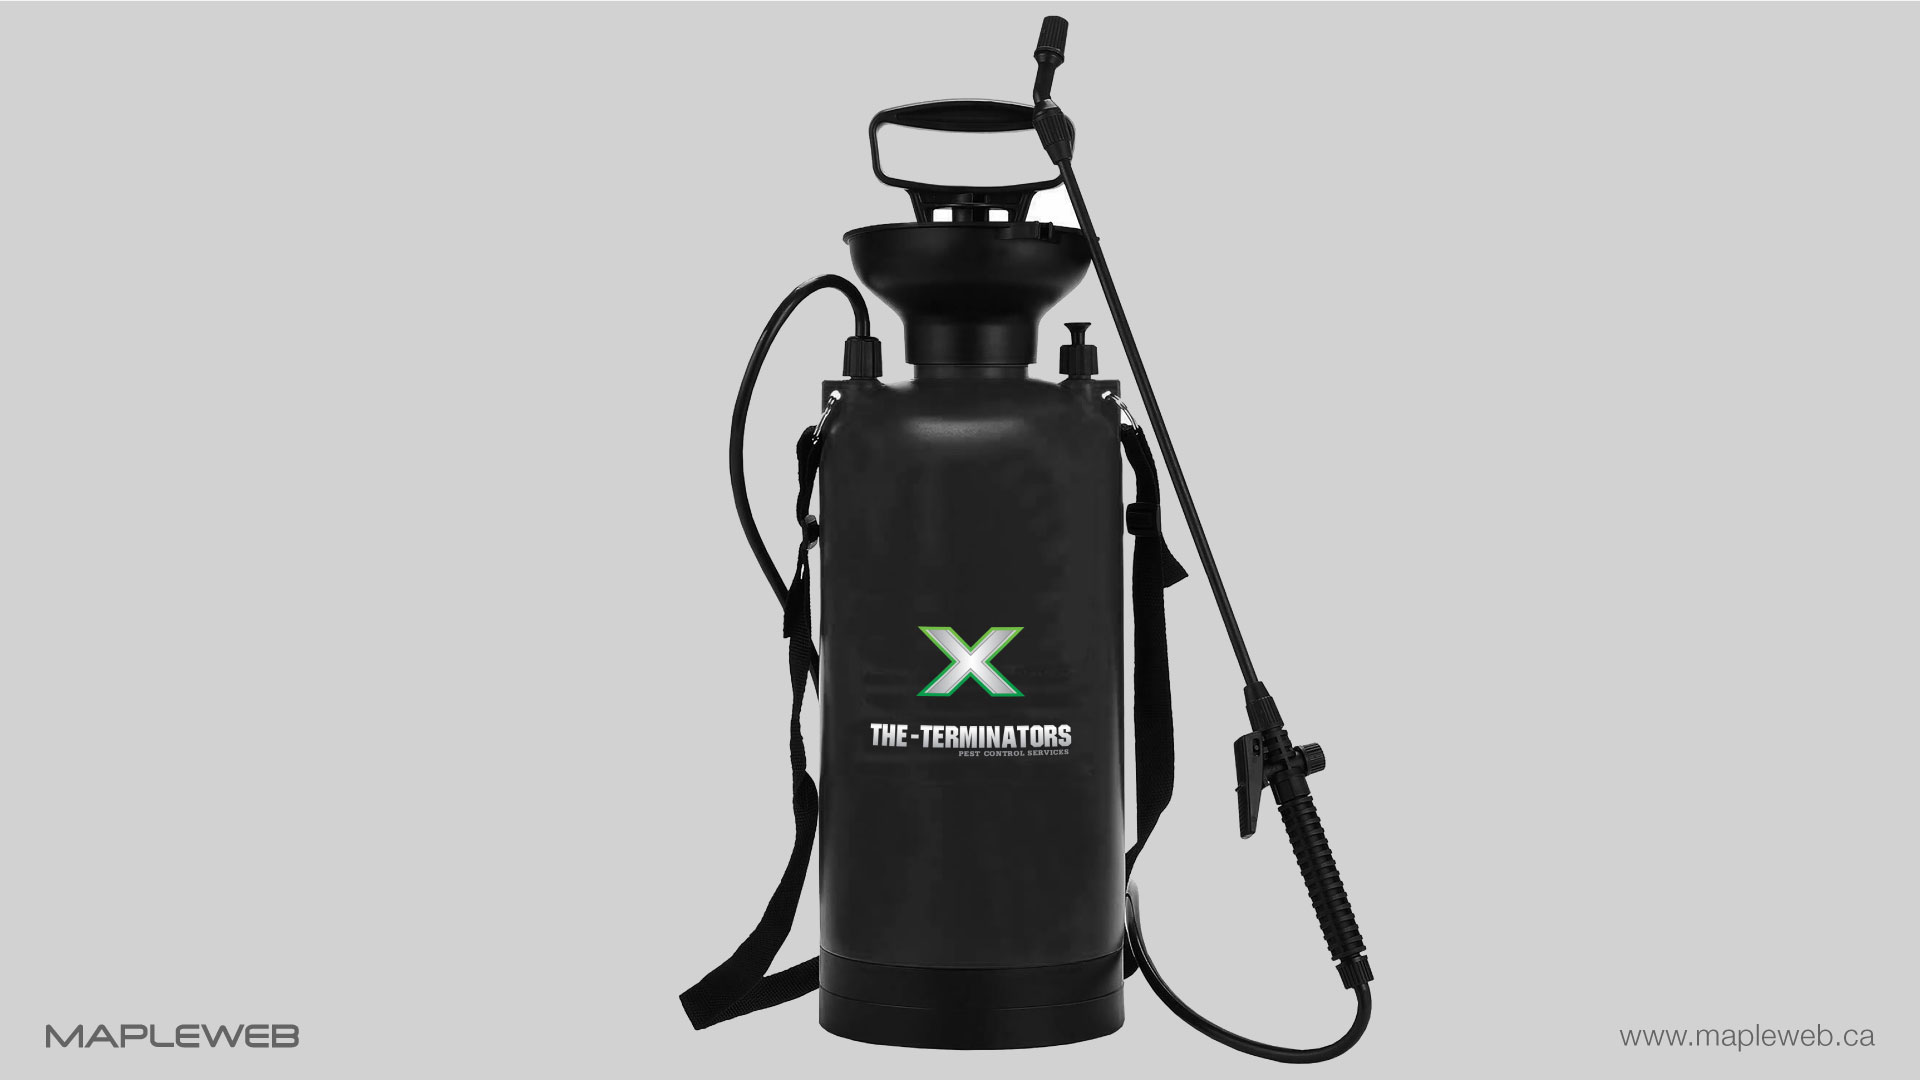 the-x-terminators-brand-logo-design-by-mapleweb-vancouver-canada-gas-cylinder-mock